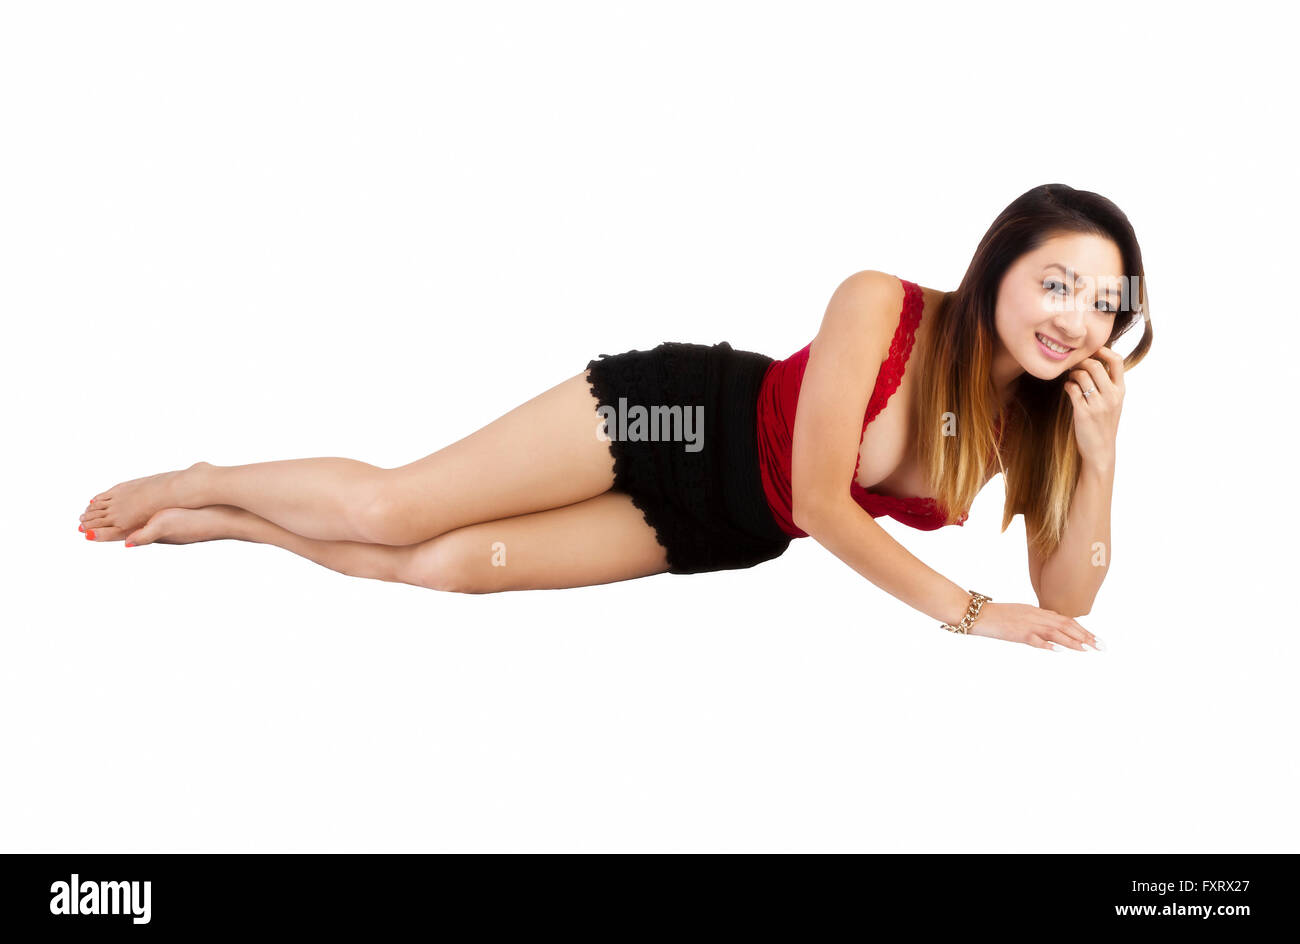 Asian American Woman Red Top Cleavage Smiling Stock Photo